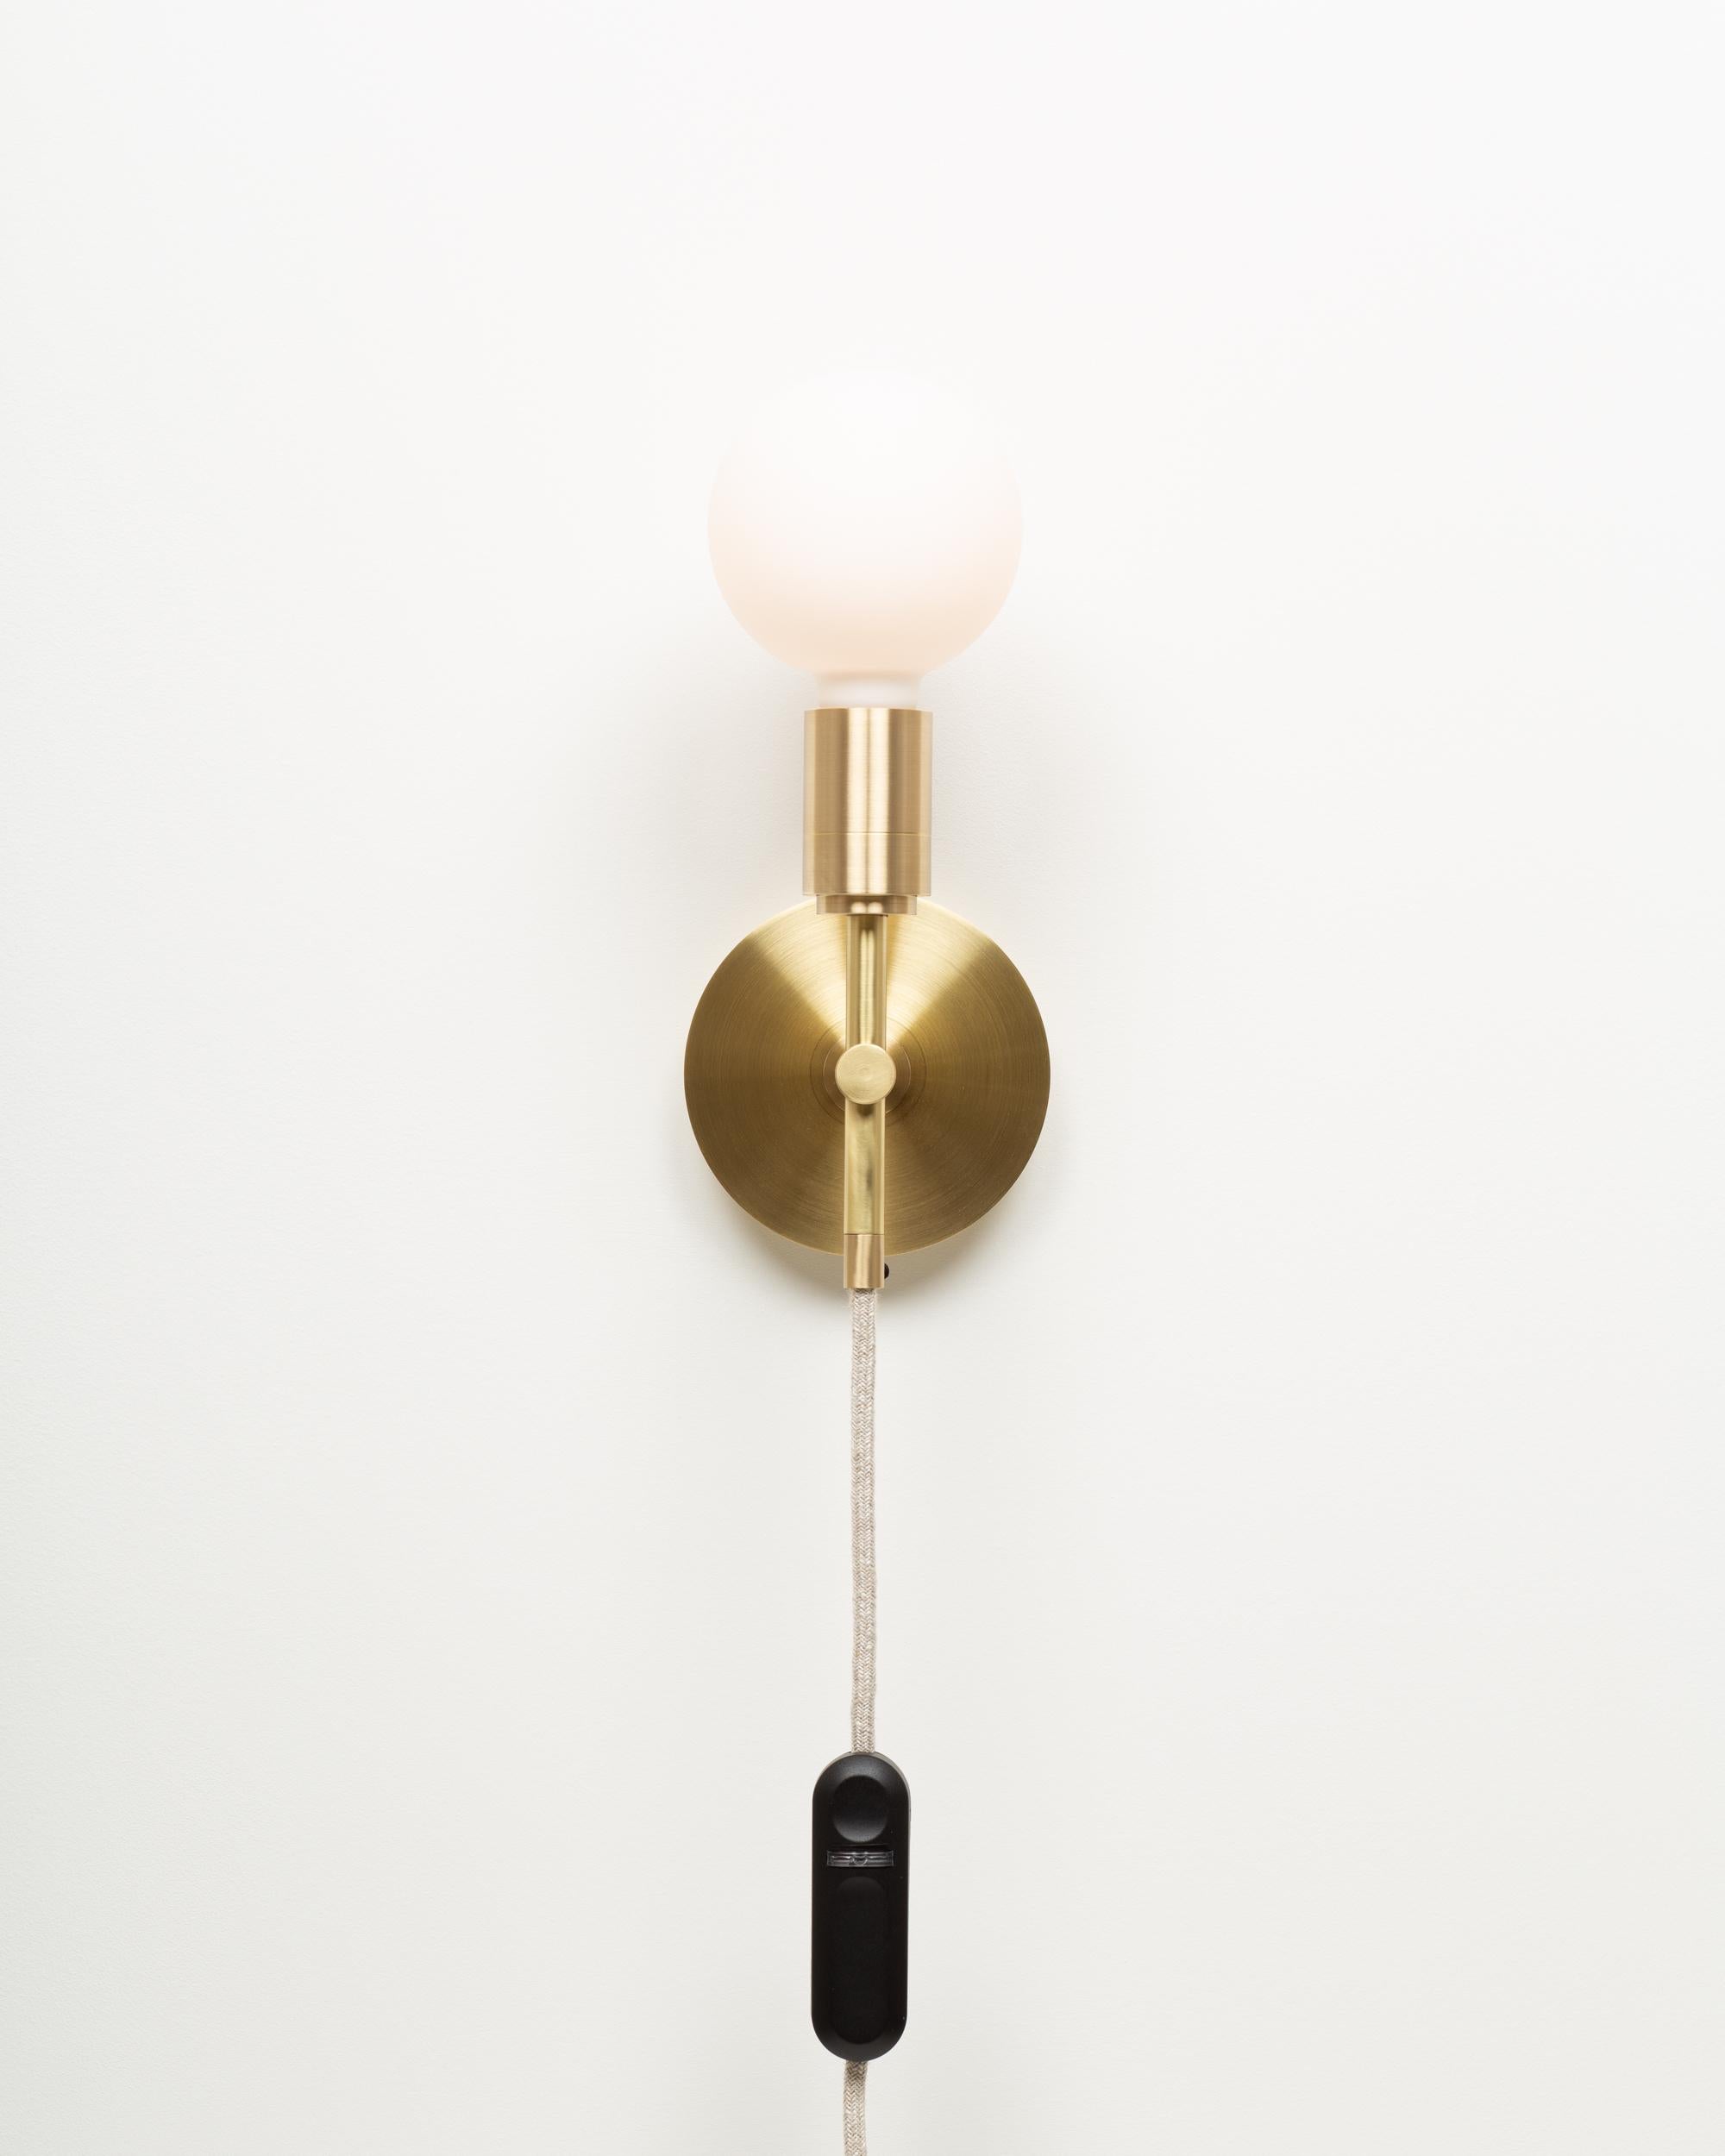 Sphere Wall Light
Brushed brass wall plate
2000K - 2800K  95CRI
600 Dim to Warm Lumens 
Surface mount with Integrated Dimmer
Sphere III Bulb Included
USA spec available on Request. 
Handmade in Hackney Wick, by Lights of London.